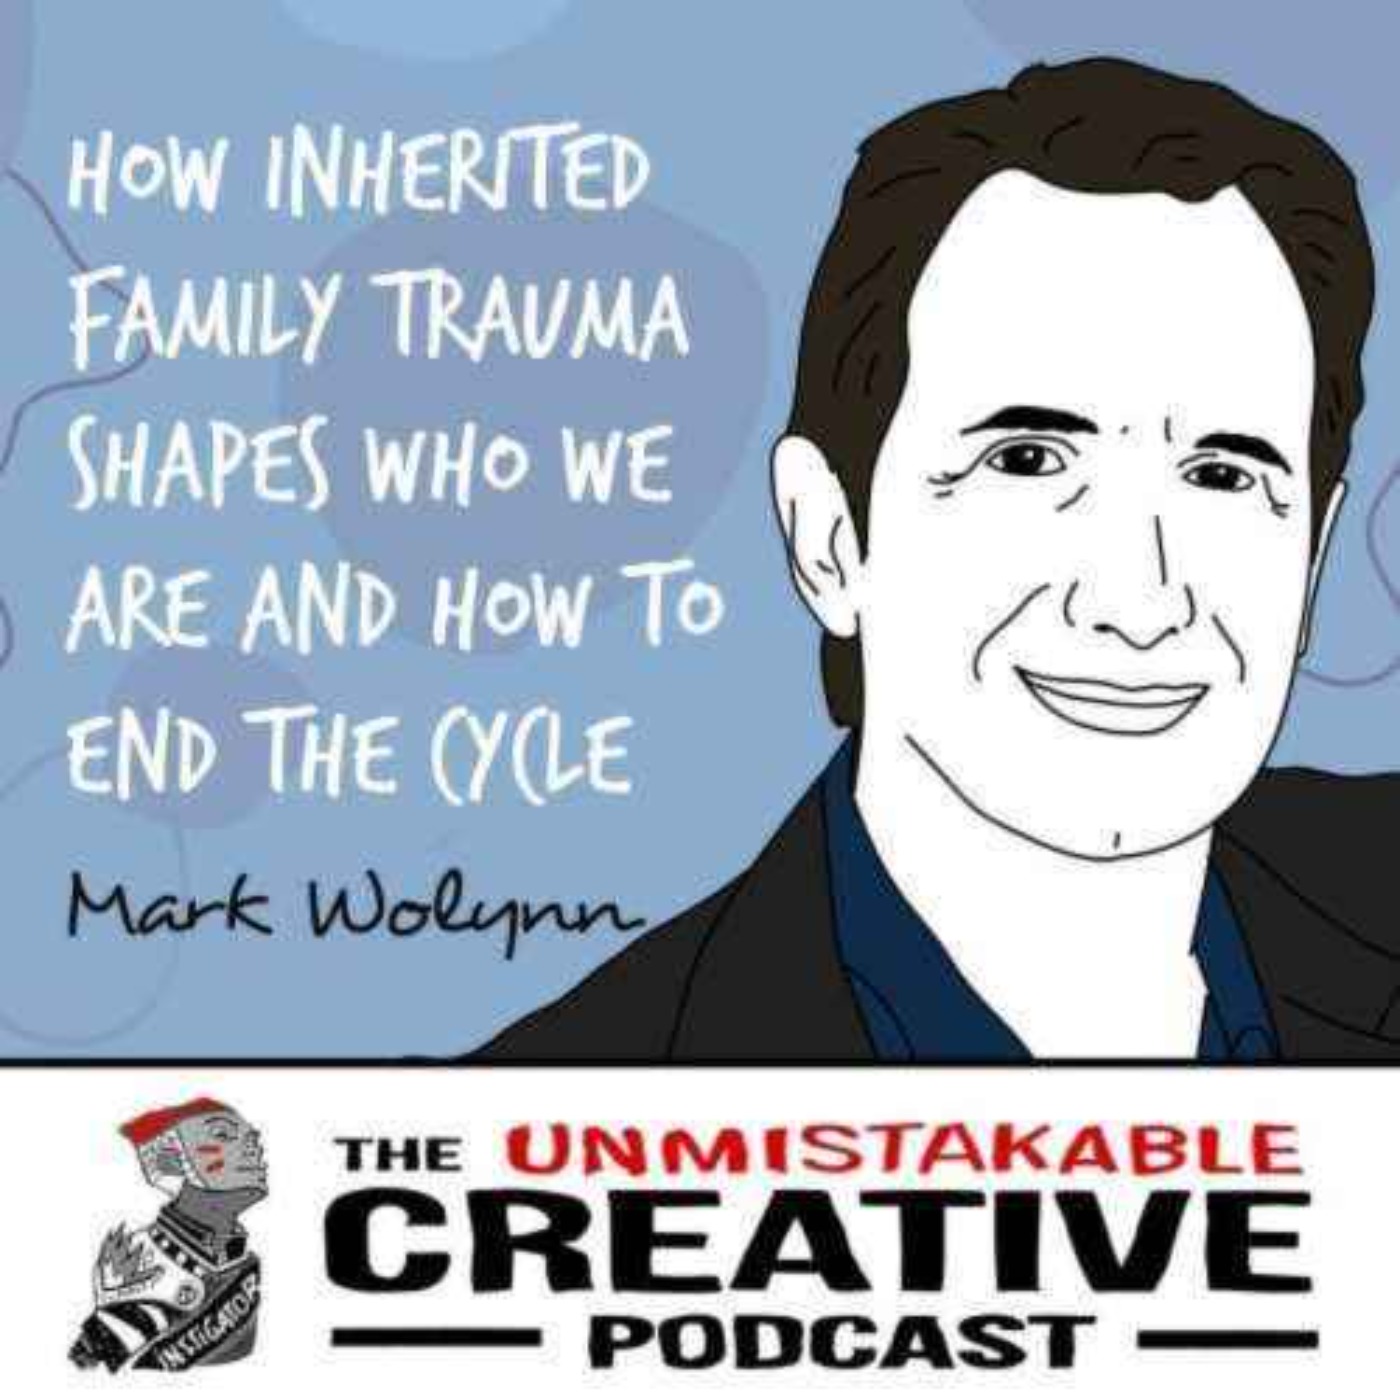 Mental Health Awareness: Mark Wolynn | How Inherited Family Trauma Shapes Who We Are and How to End the Cycle